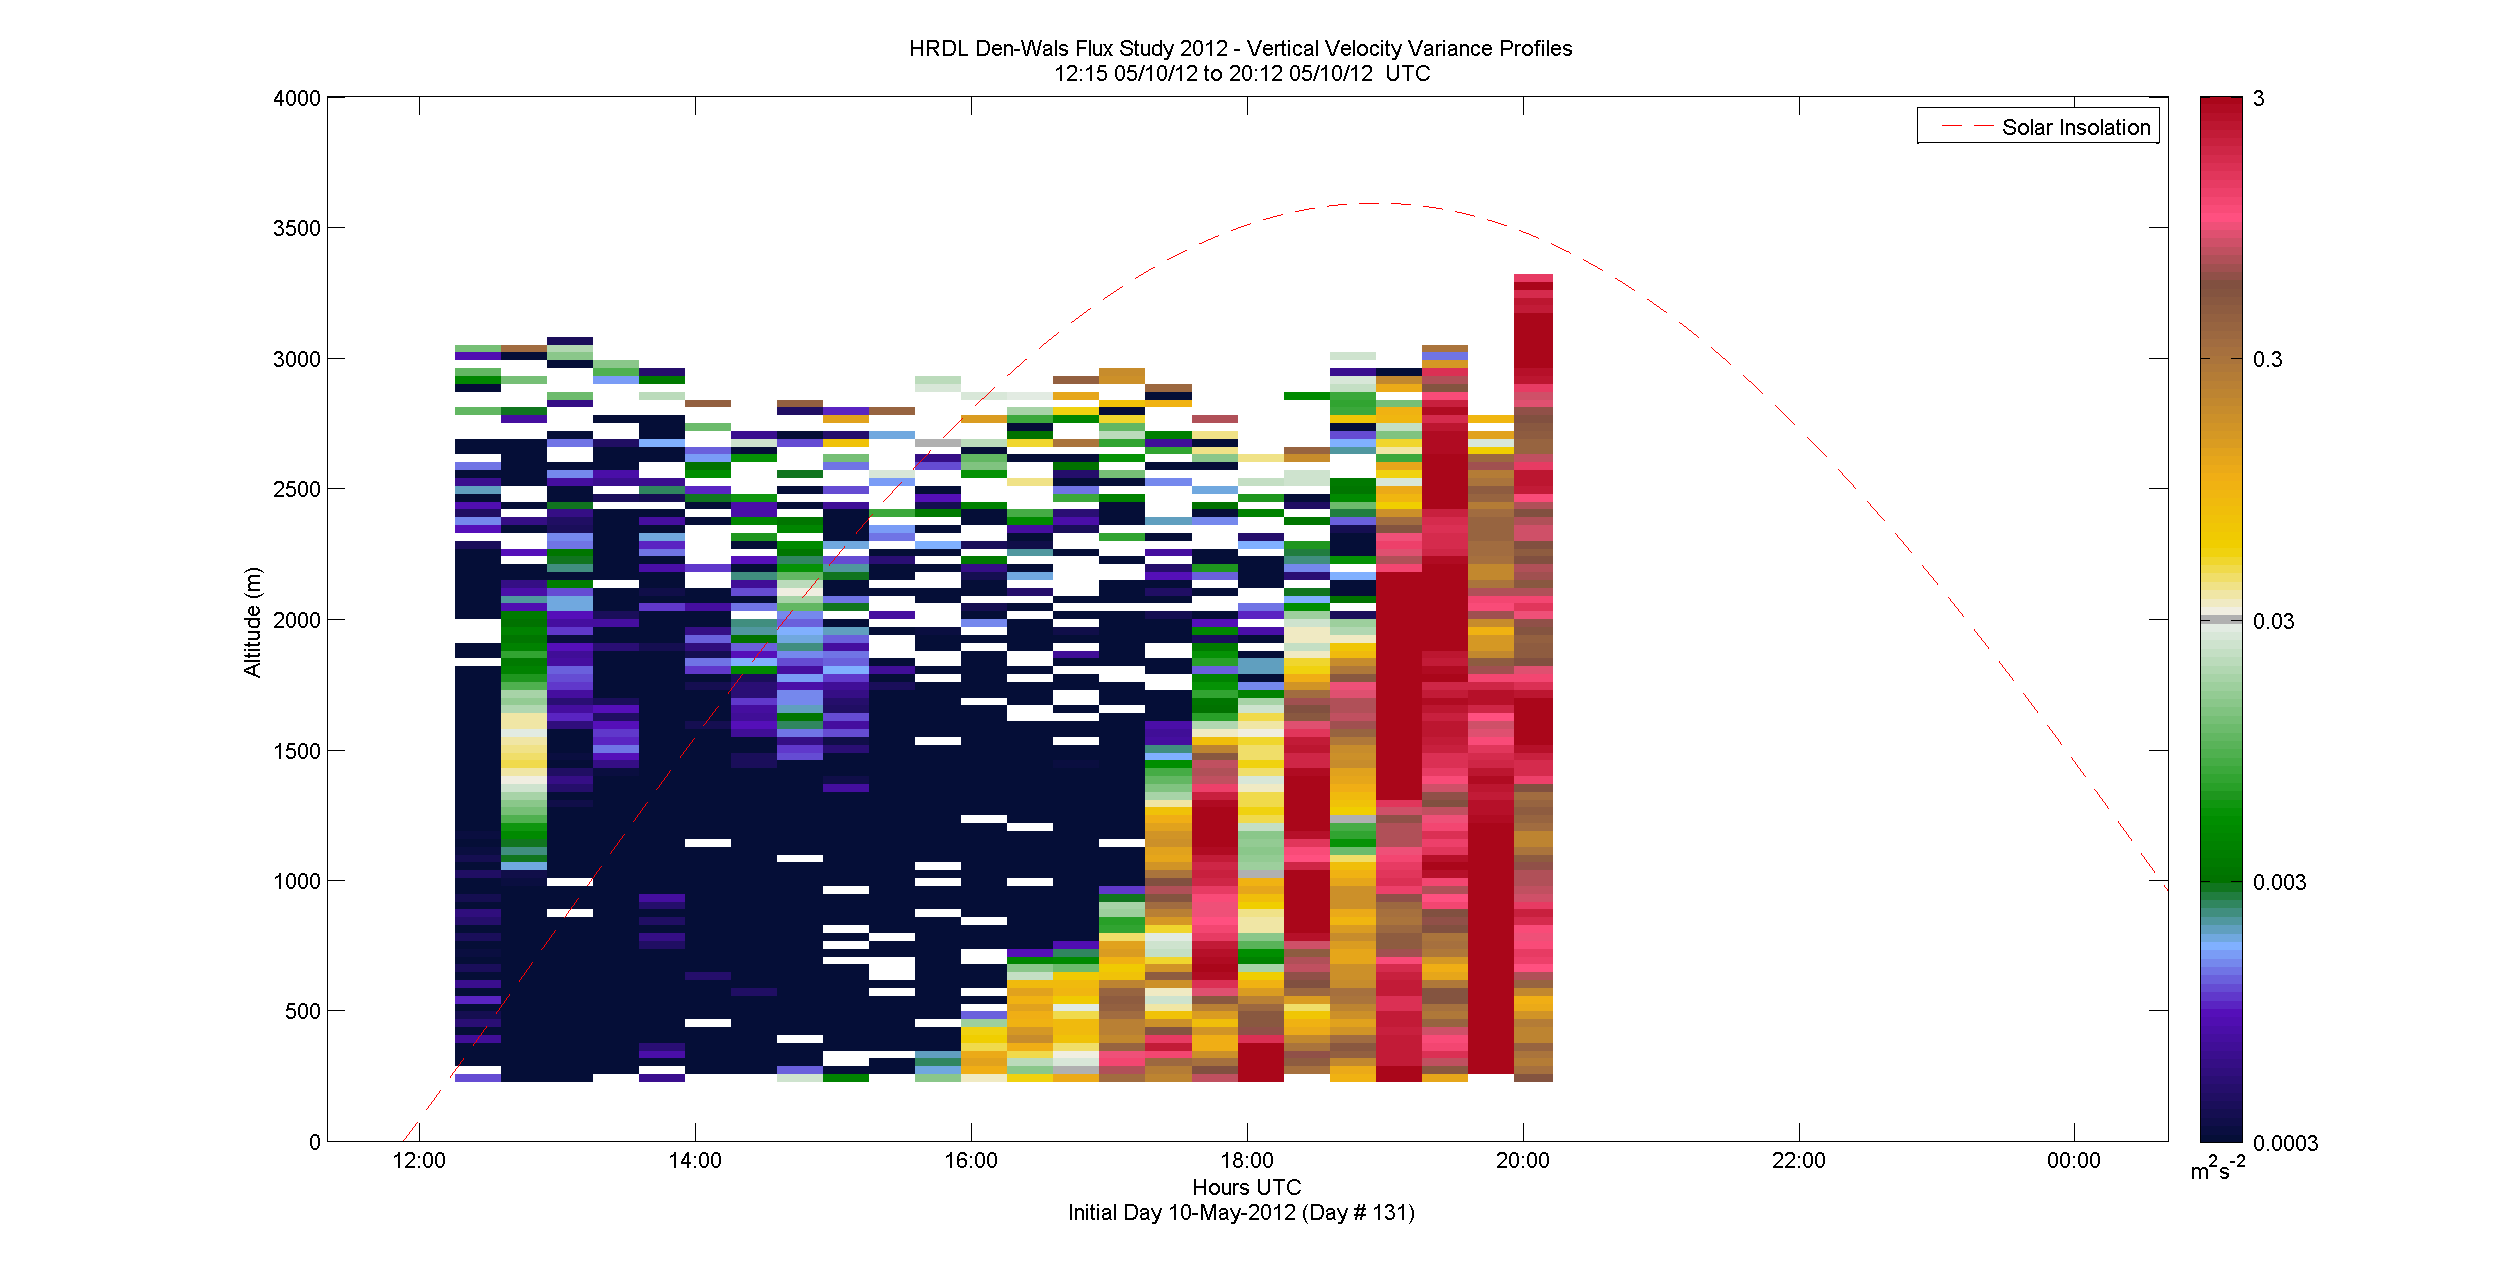 HRDL vertical variance profile - May 10 pm